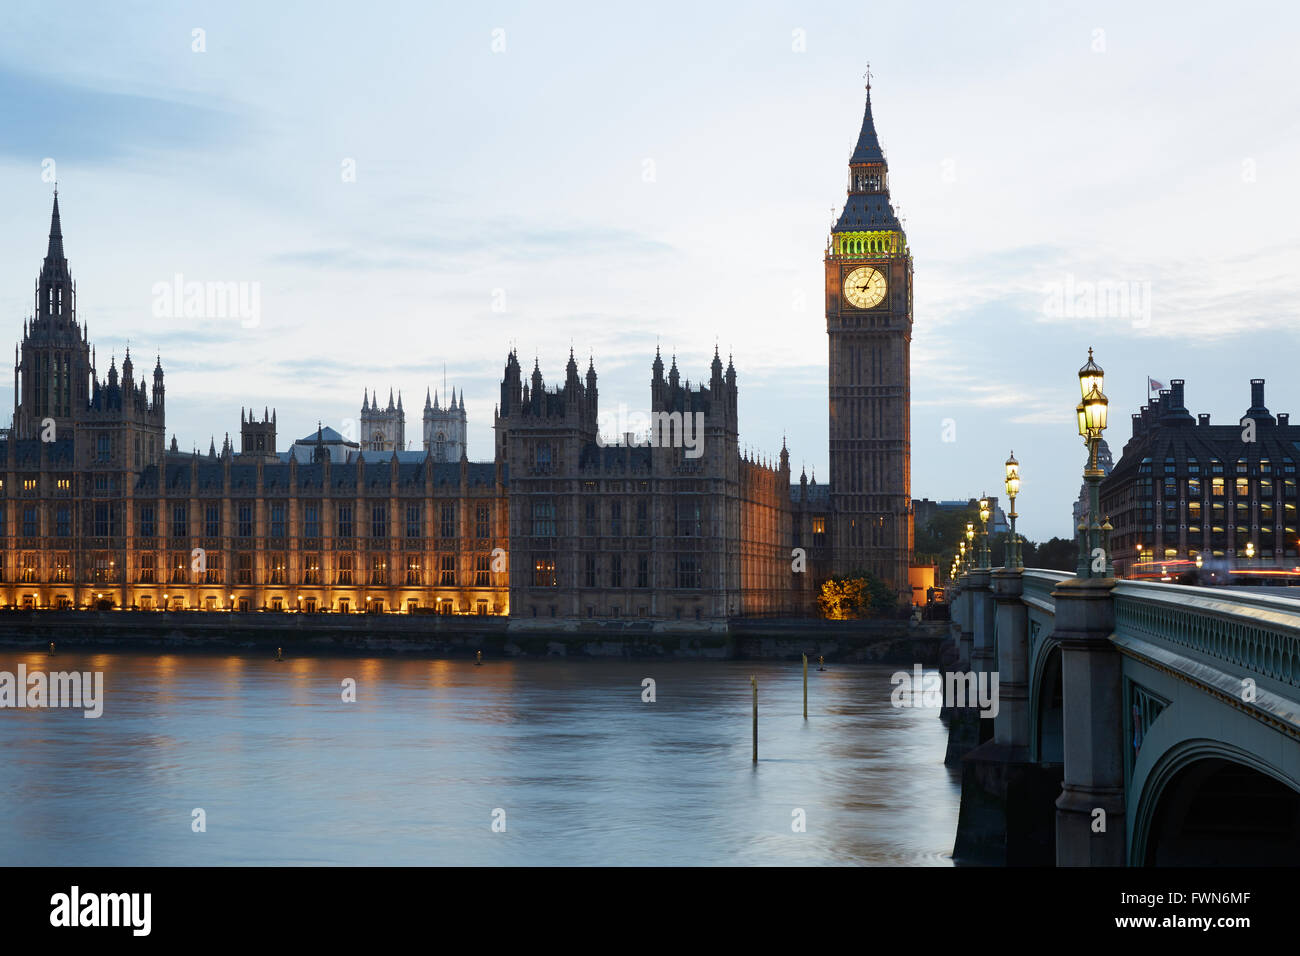 Big Ben and Palace of Westminster at dusk in London, natural light and colors Stock Photo